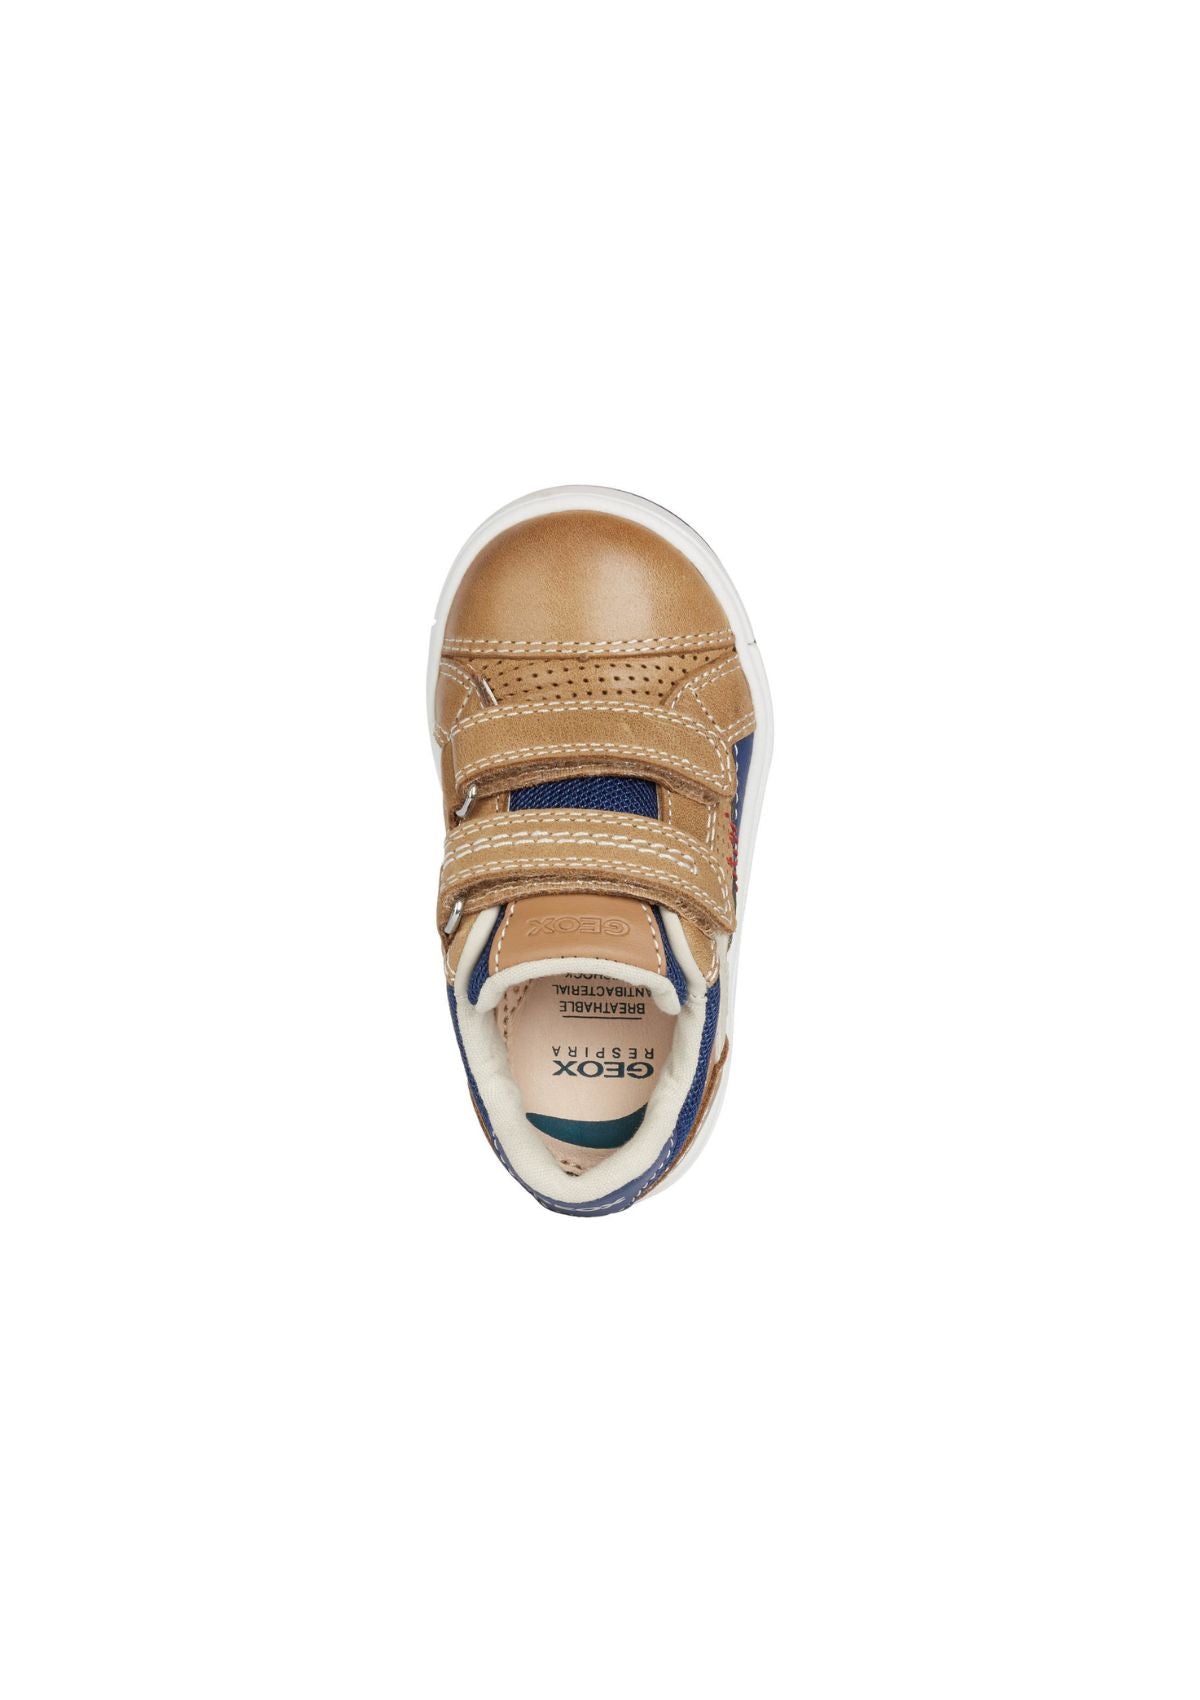 Geox Baby Boys Trainers TROTTOLA Caramel Navy up